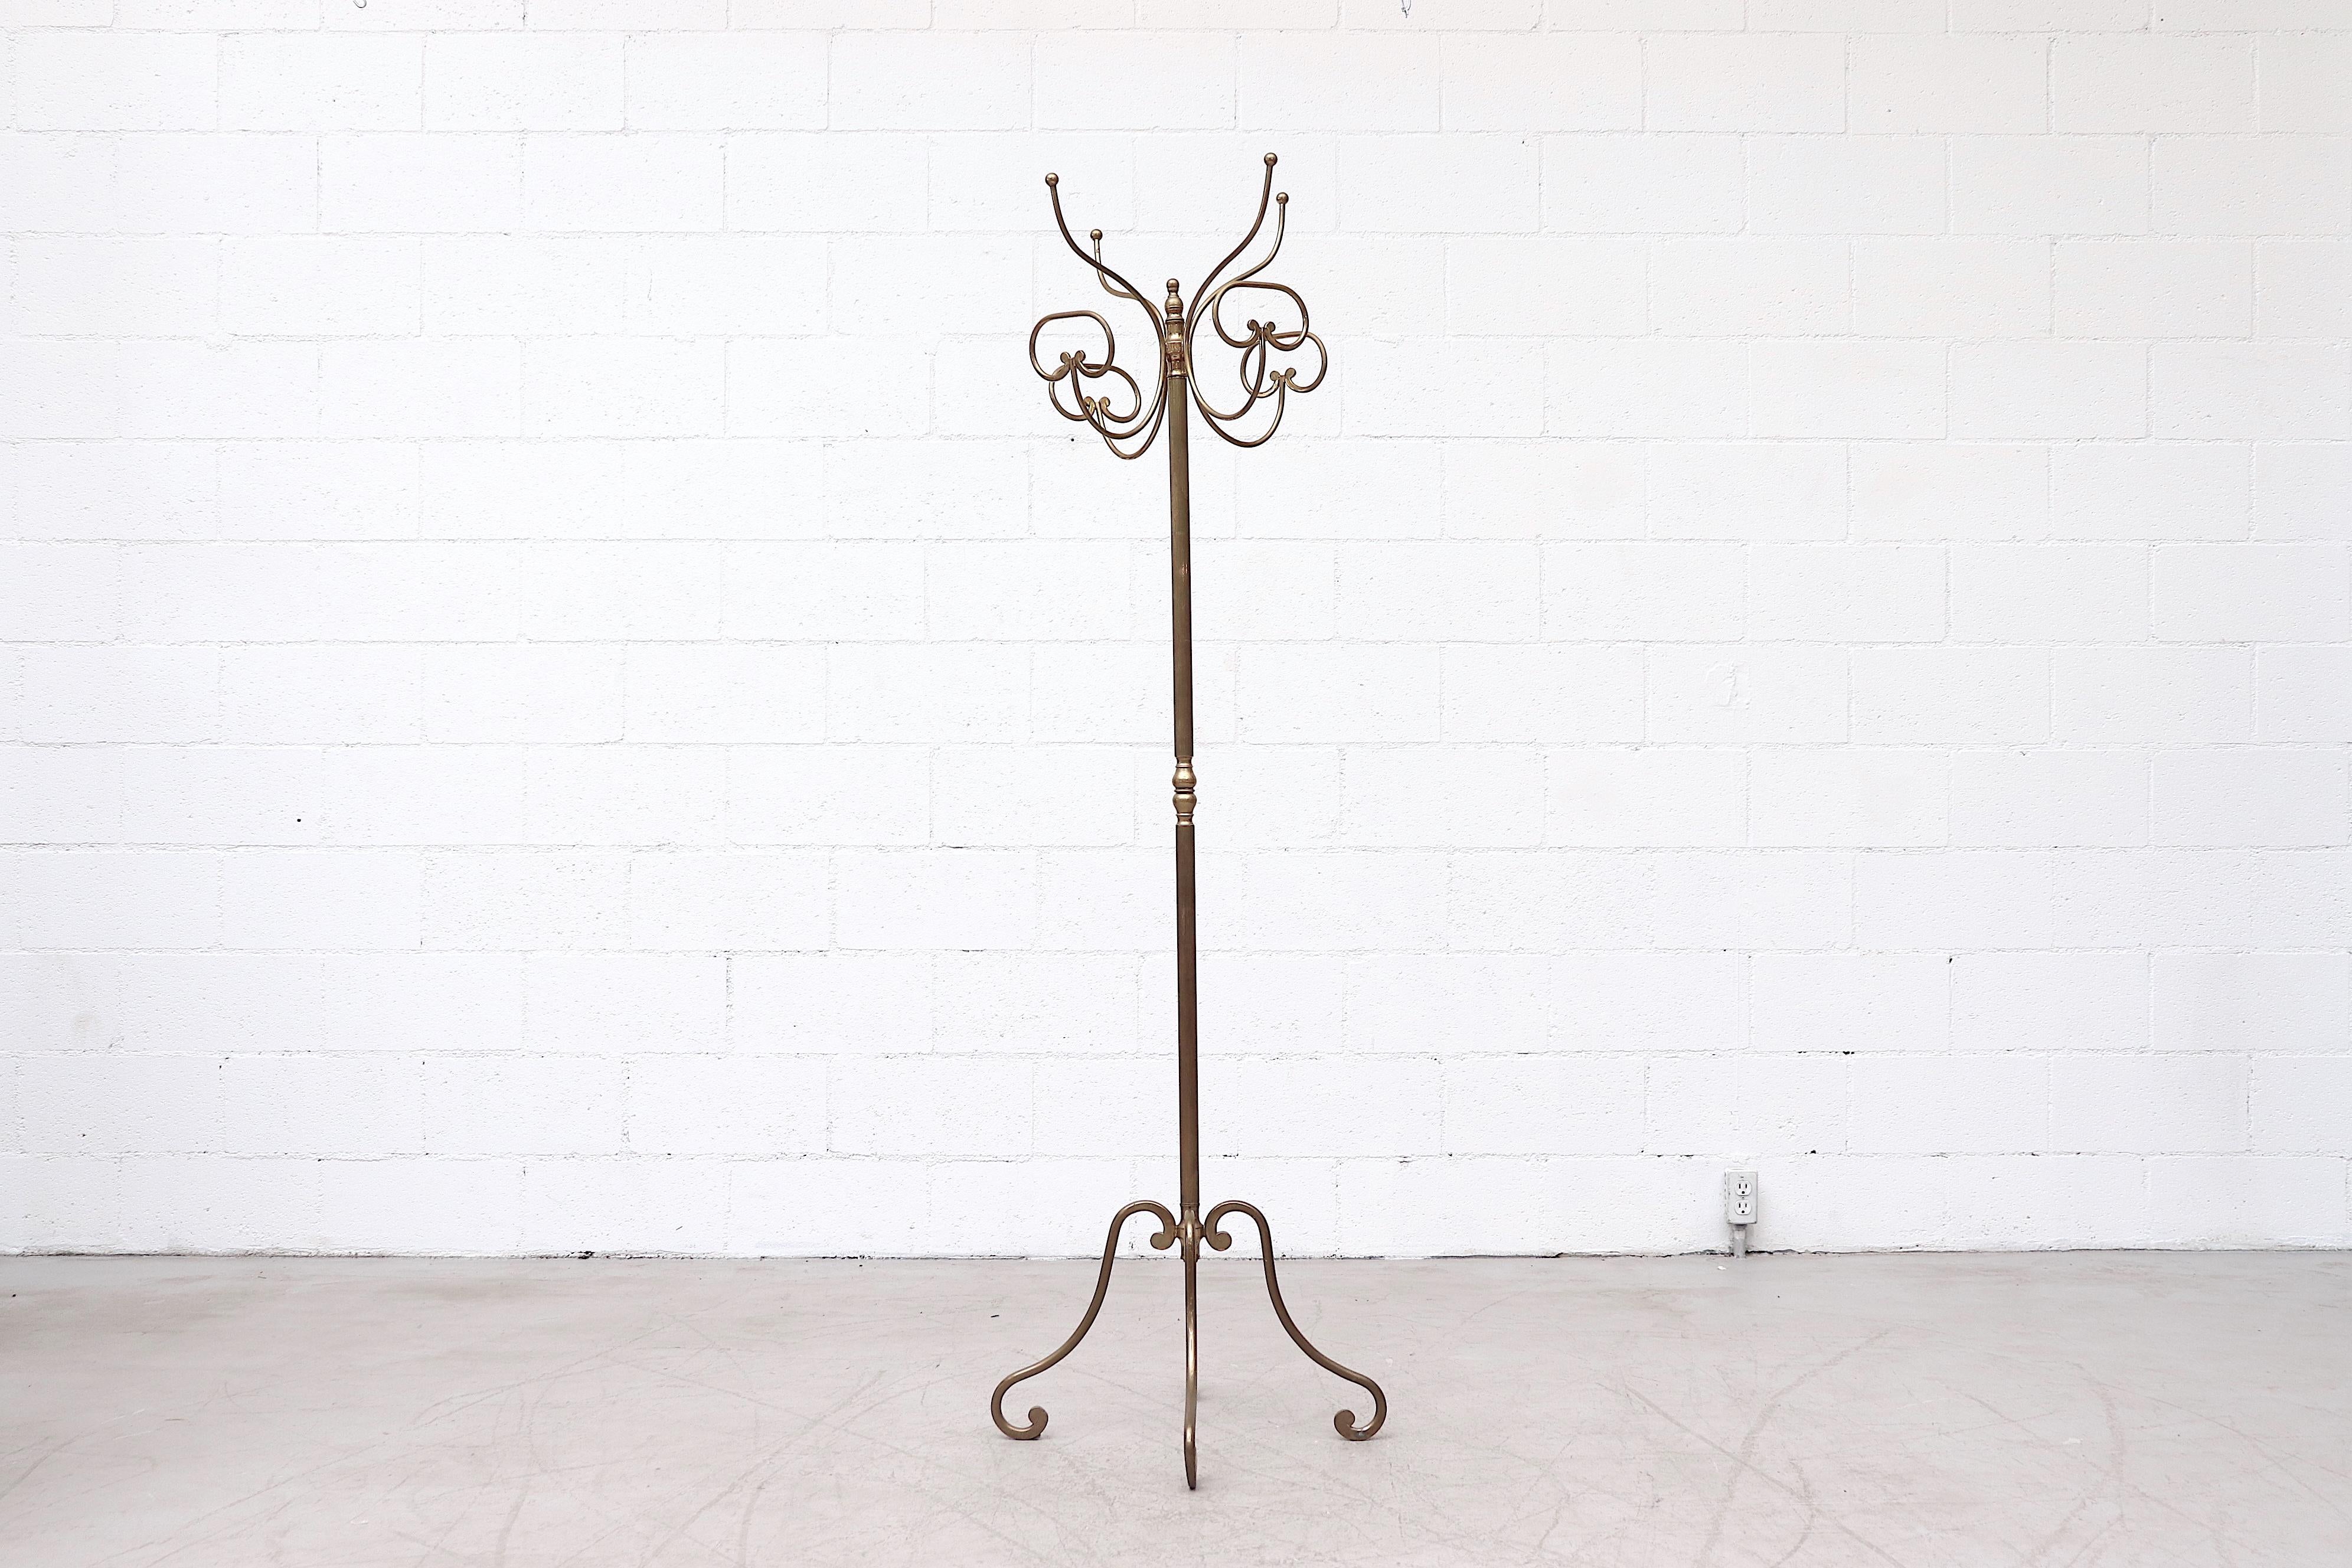 Midcentury Italian brass coat racks with rotating tops and ribbed stems, curved hooks and matching brass legs. In original condition with nice patina and some wear consistent with age and use. 1 available.